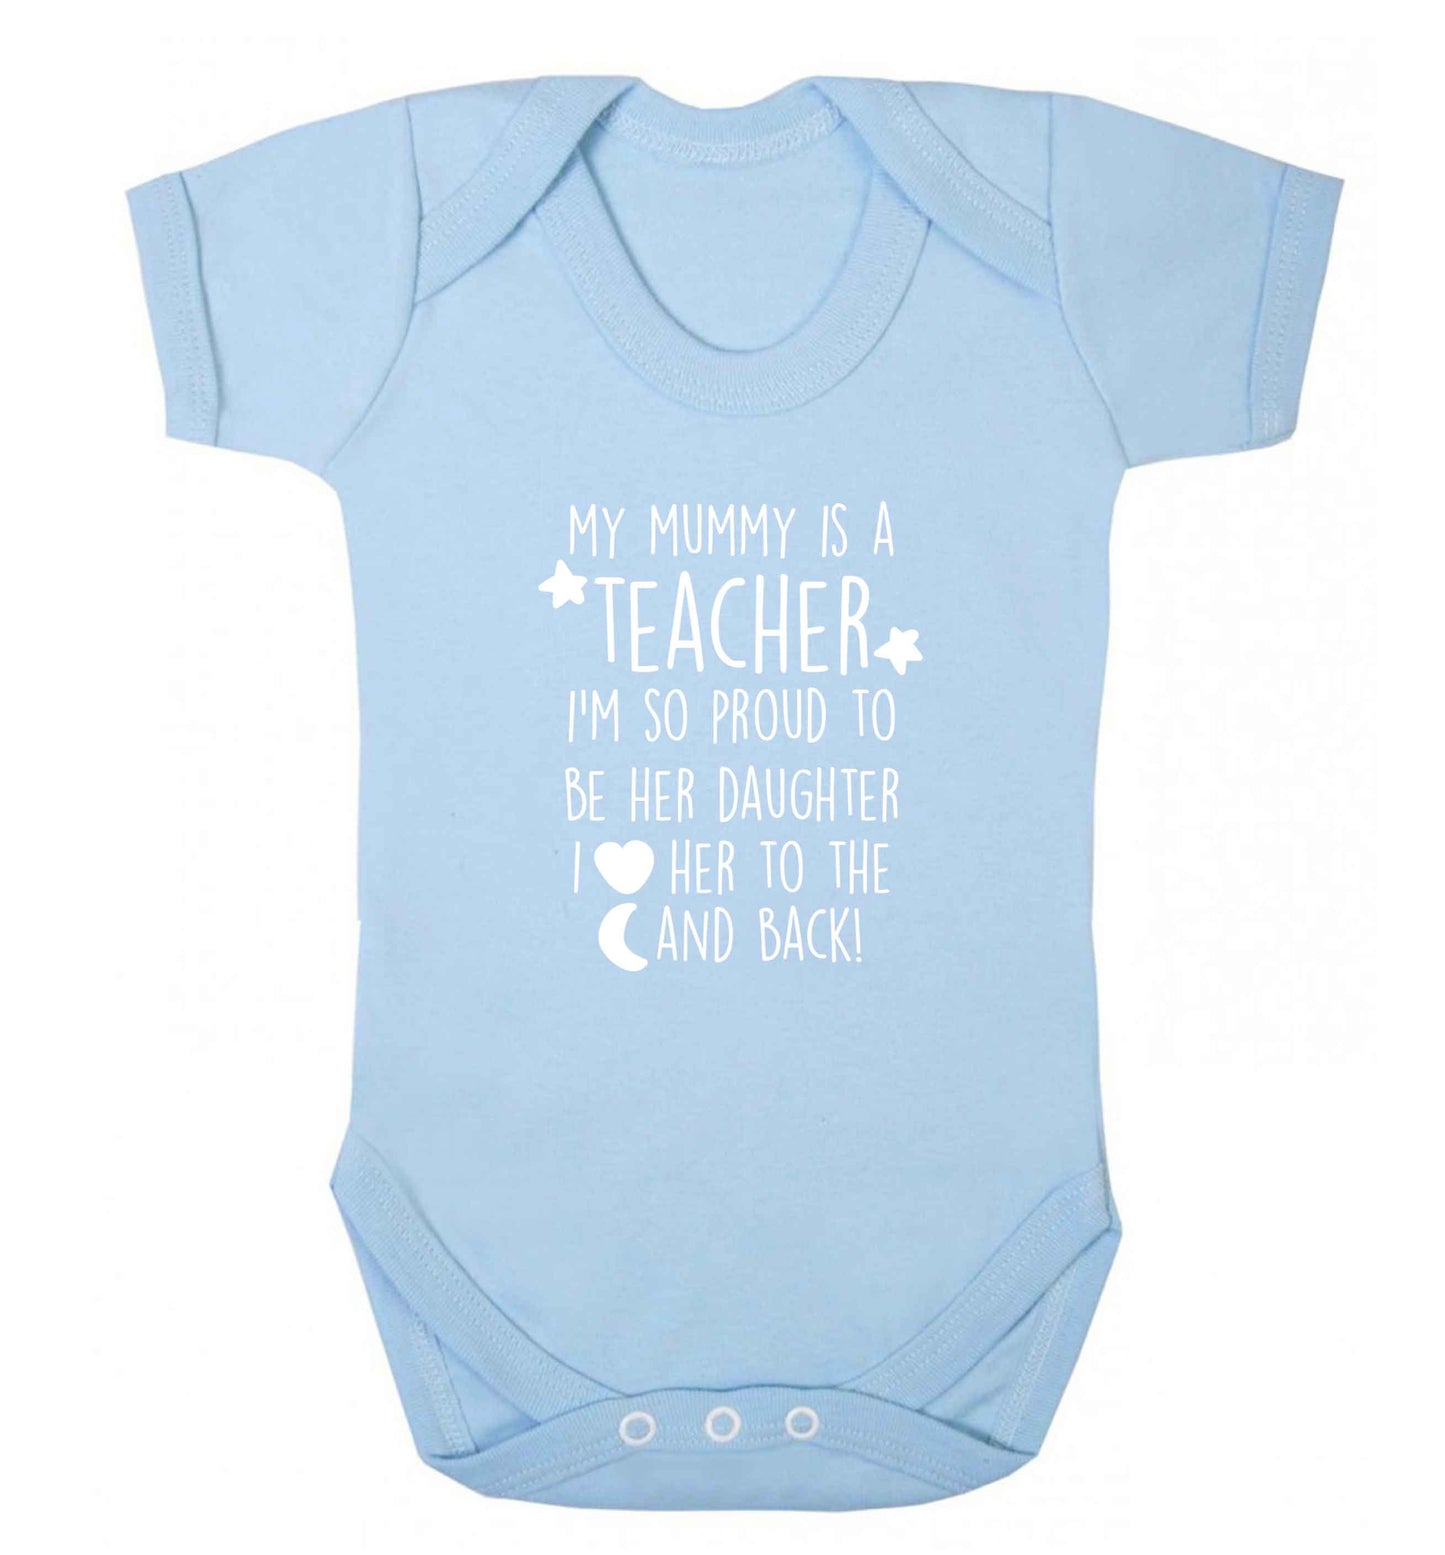 My mummy is a teacher I'm so proud to be her daughter I love her to the moon and back baby vest pale blue 18-24 months